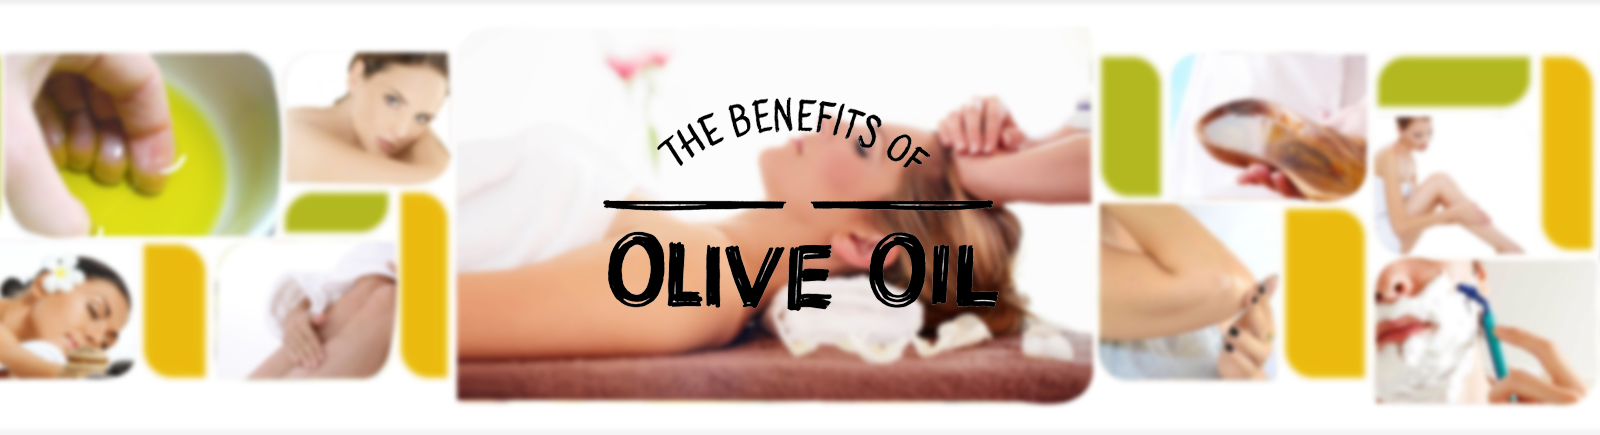 The Benefits of Olive Oil for Hair Care